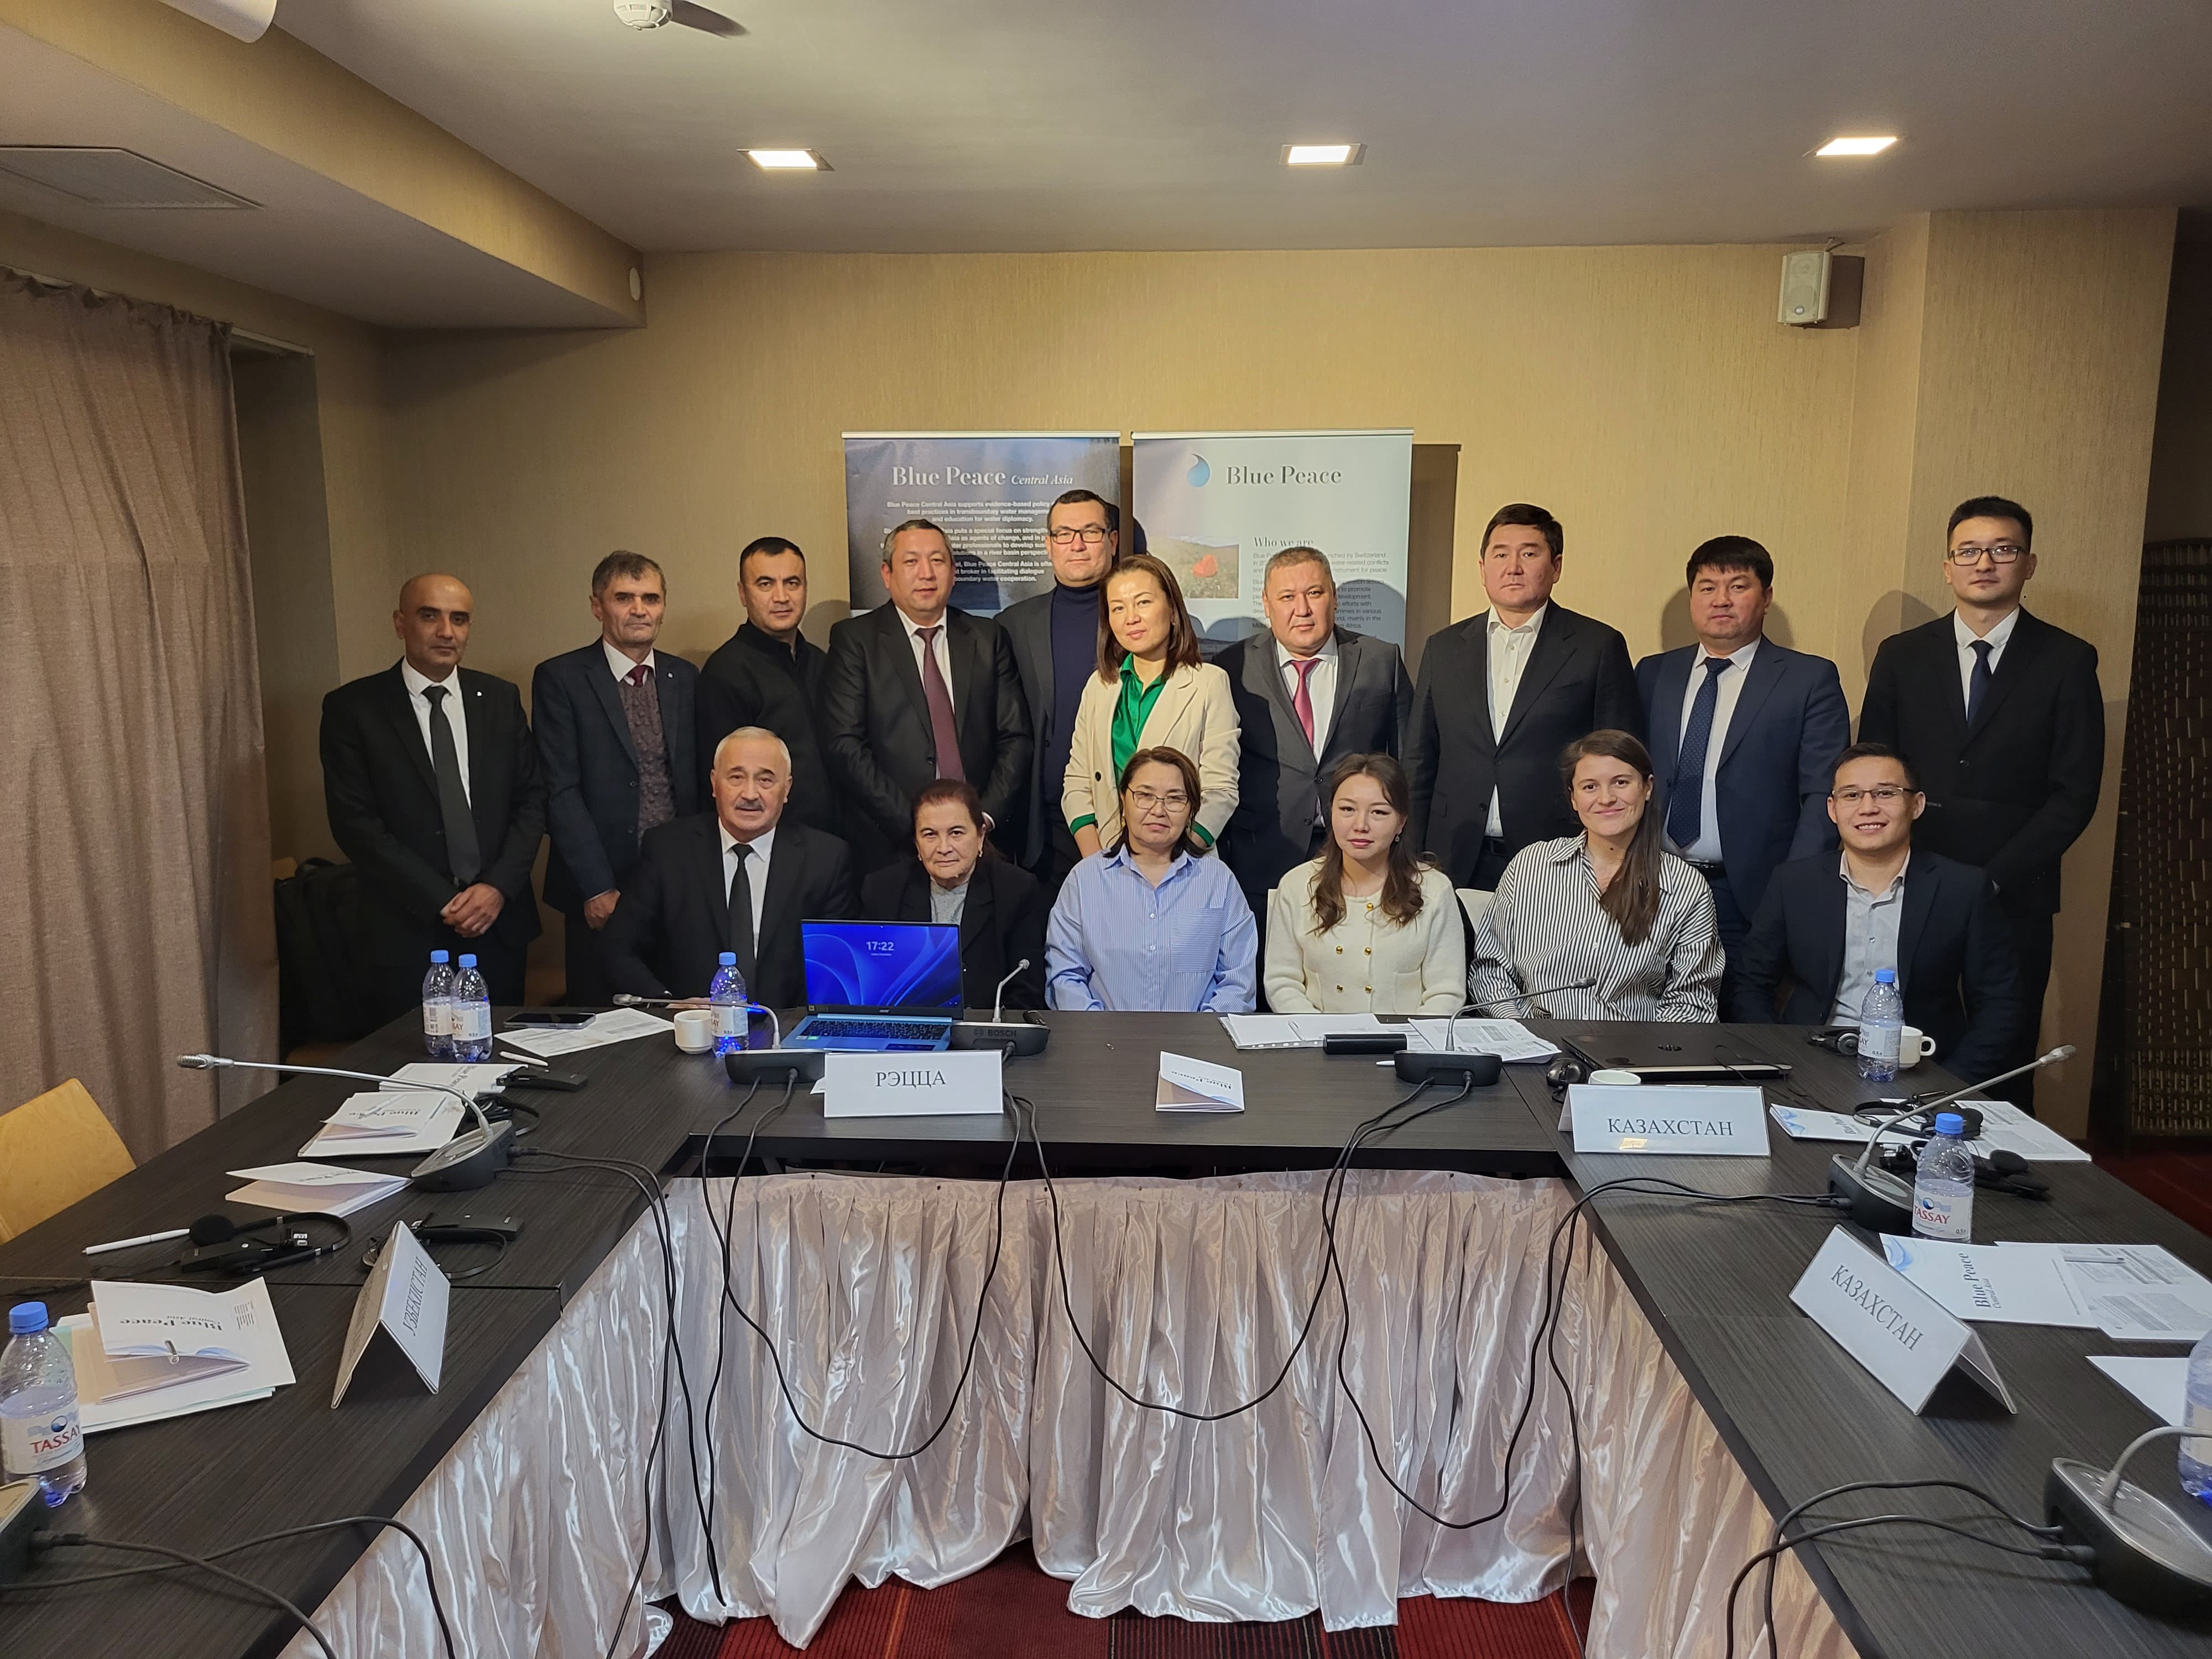 Water Quality in Central Asia Discussed by Experts of the Regional Working Group in Astana, Kazakhstan